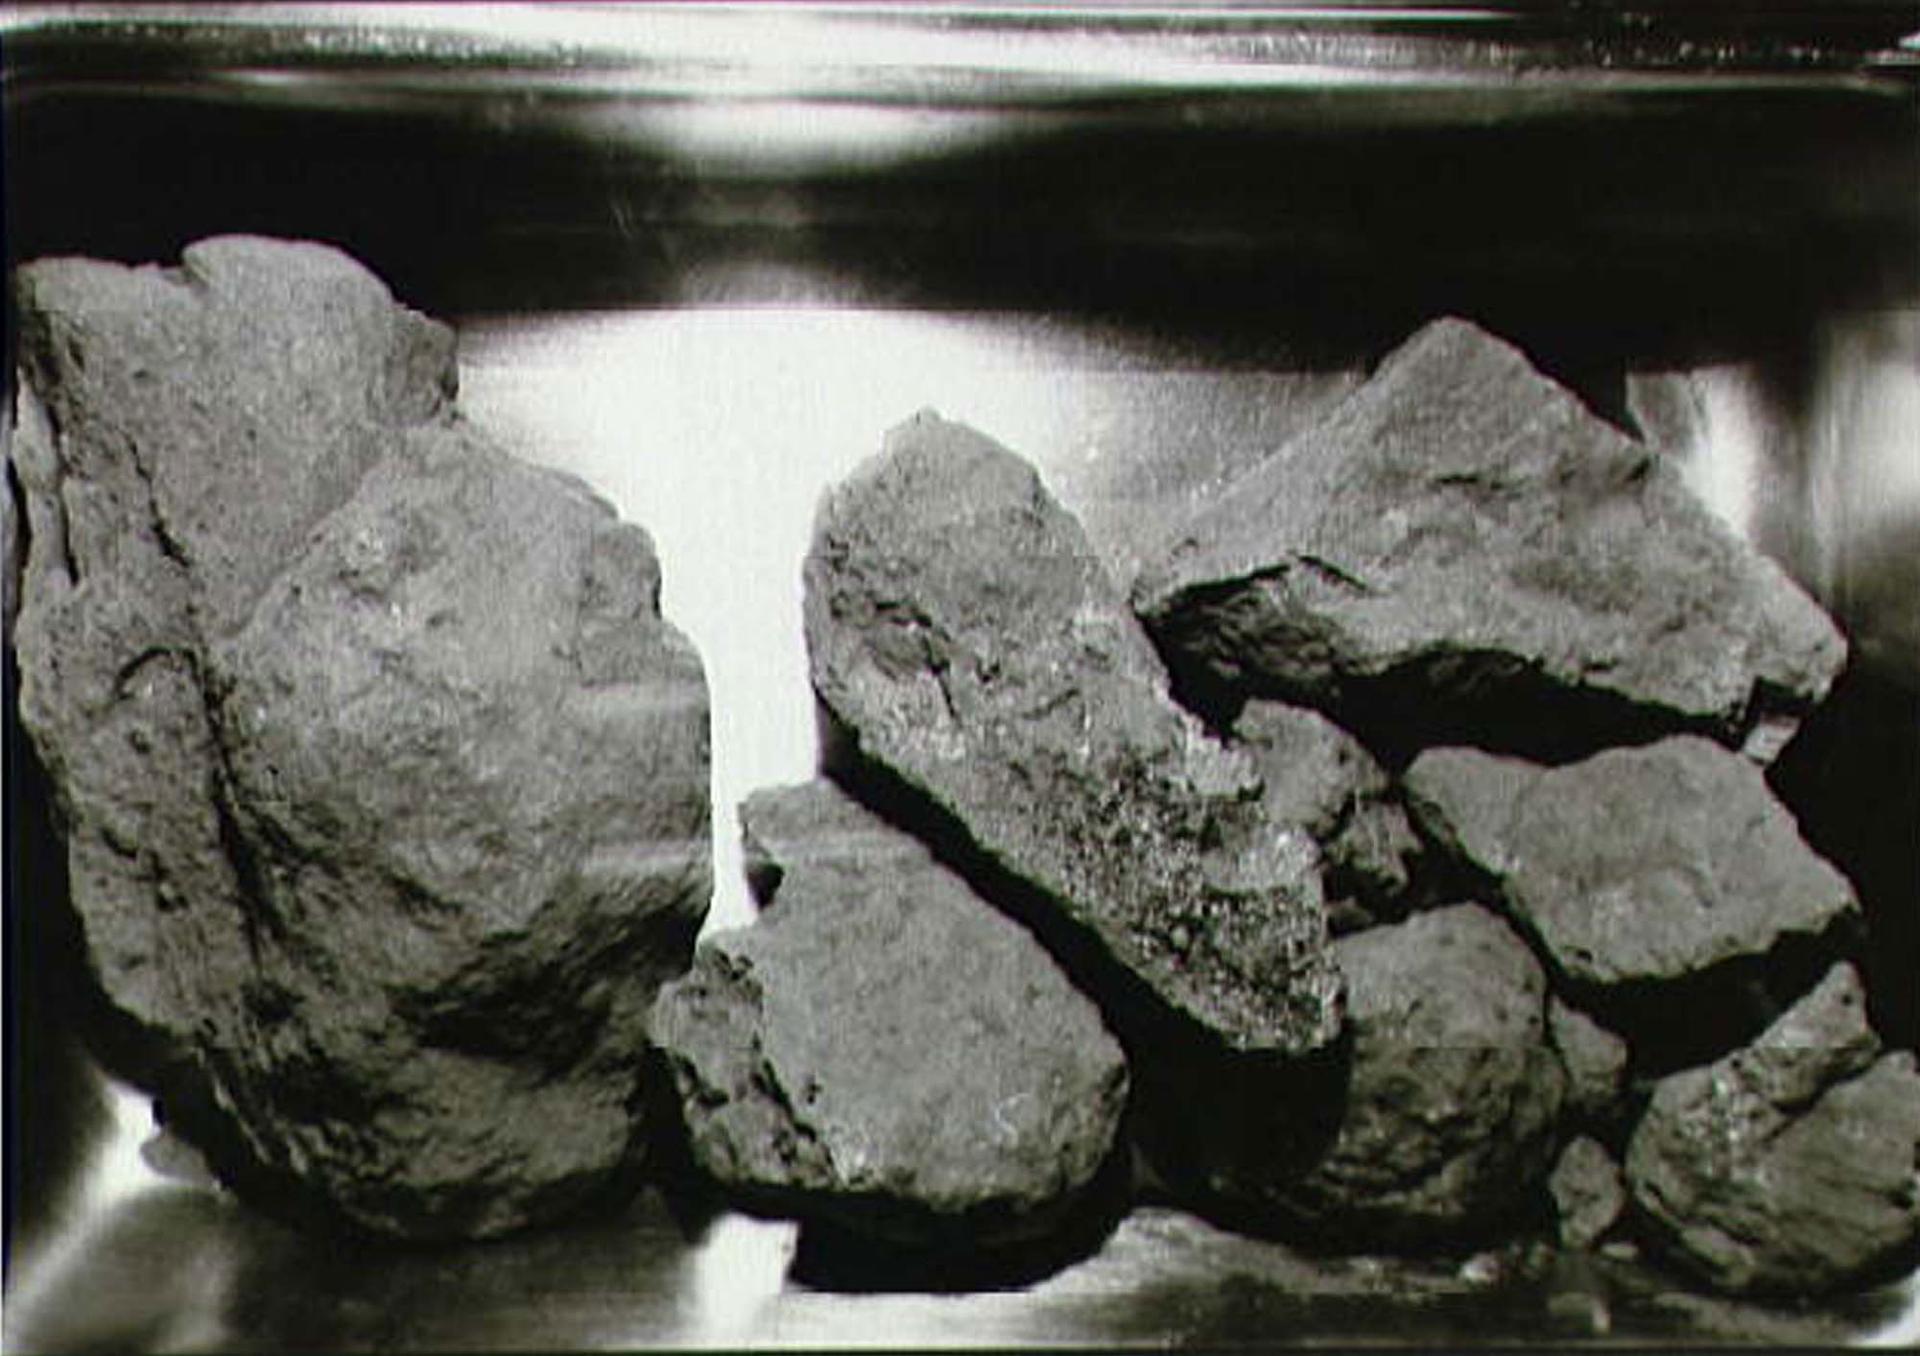 Several rocks from the surface of the moon are shown next to each other.